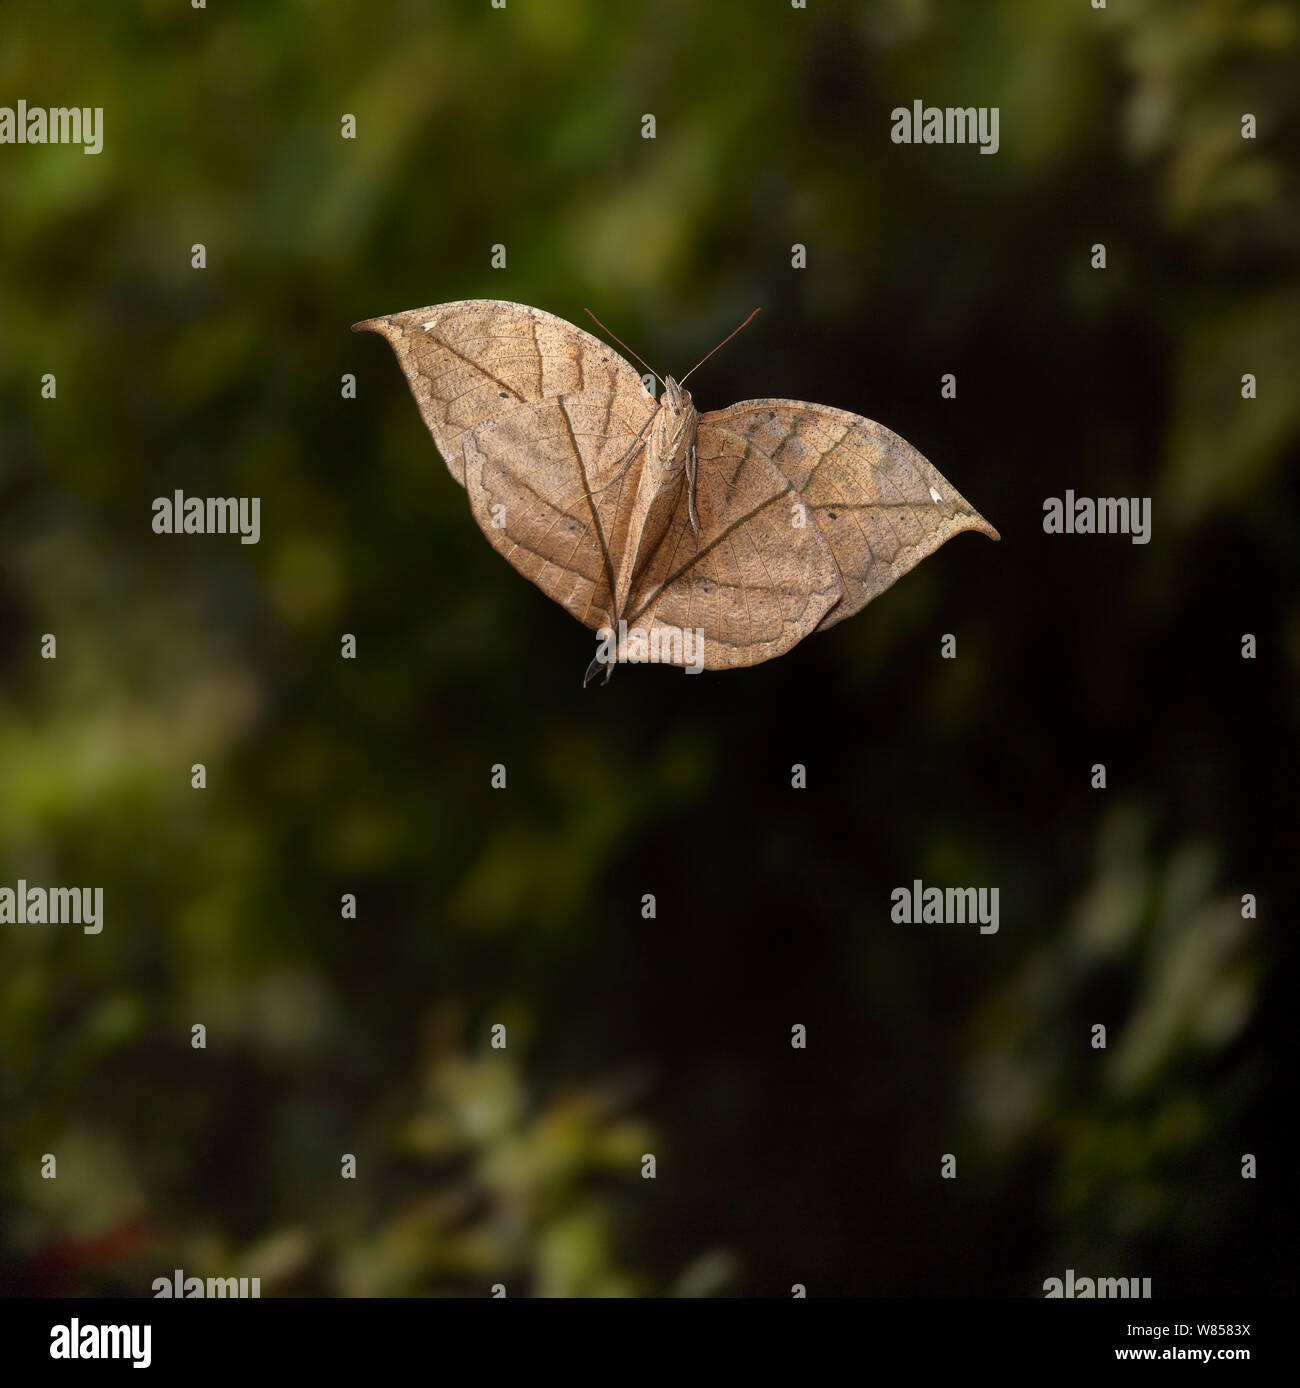 Indian leaf butterfly (Kallima paralekta) in flight showing the cryptic leaf-like underwings, controlled conditions. Stock Photo